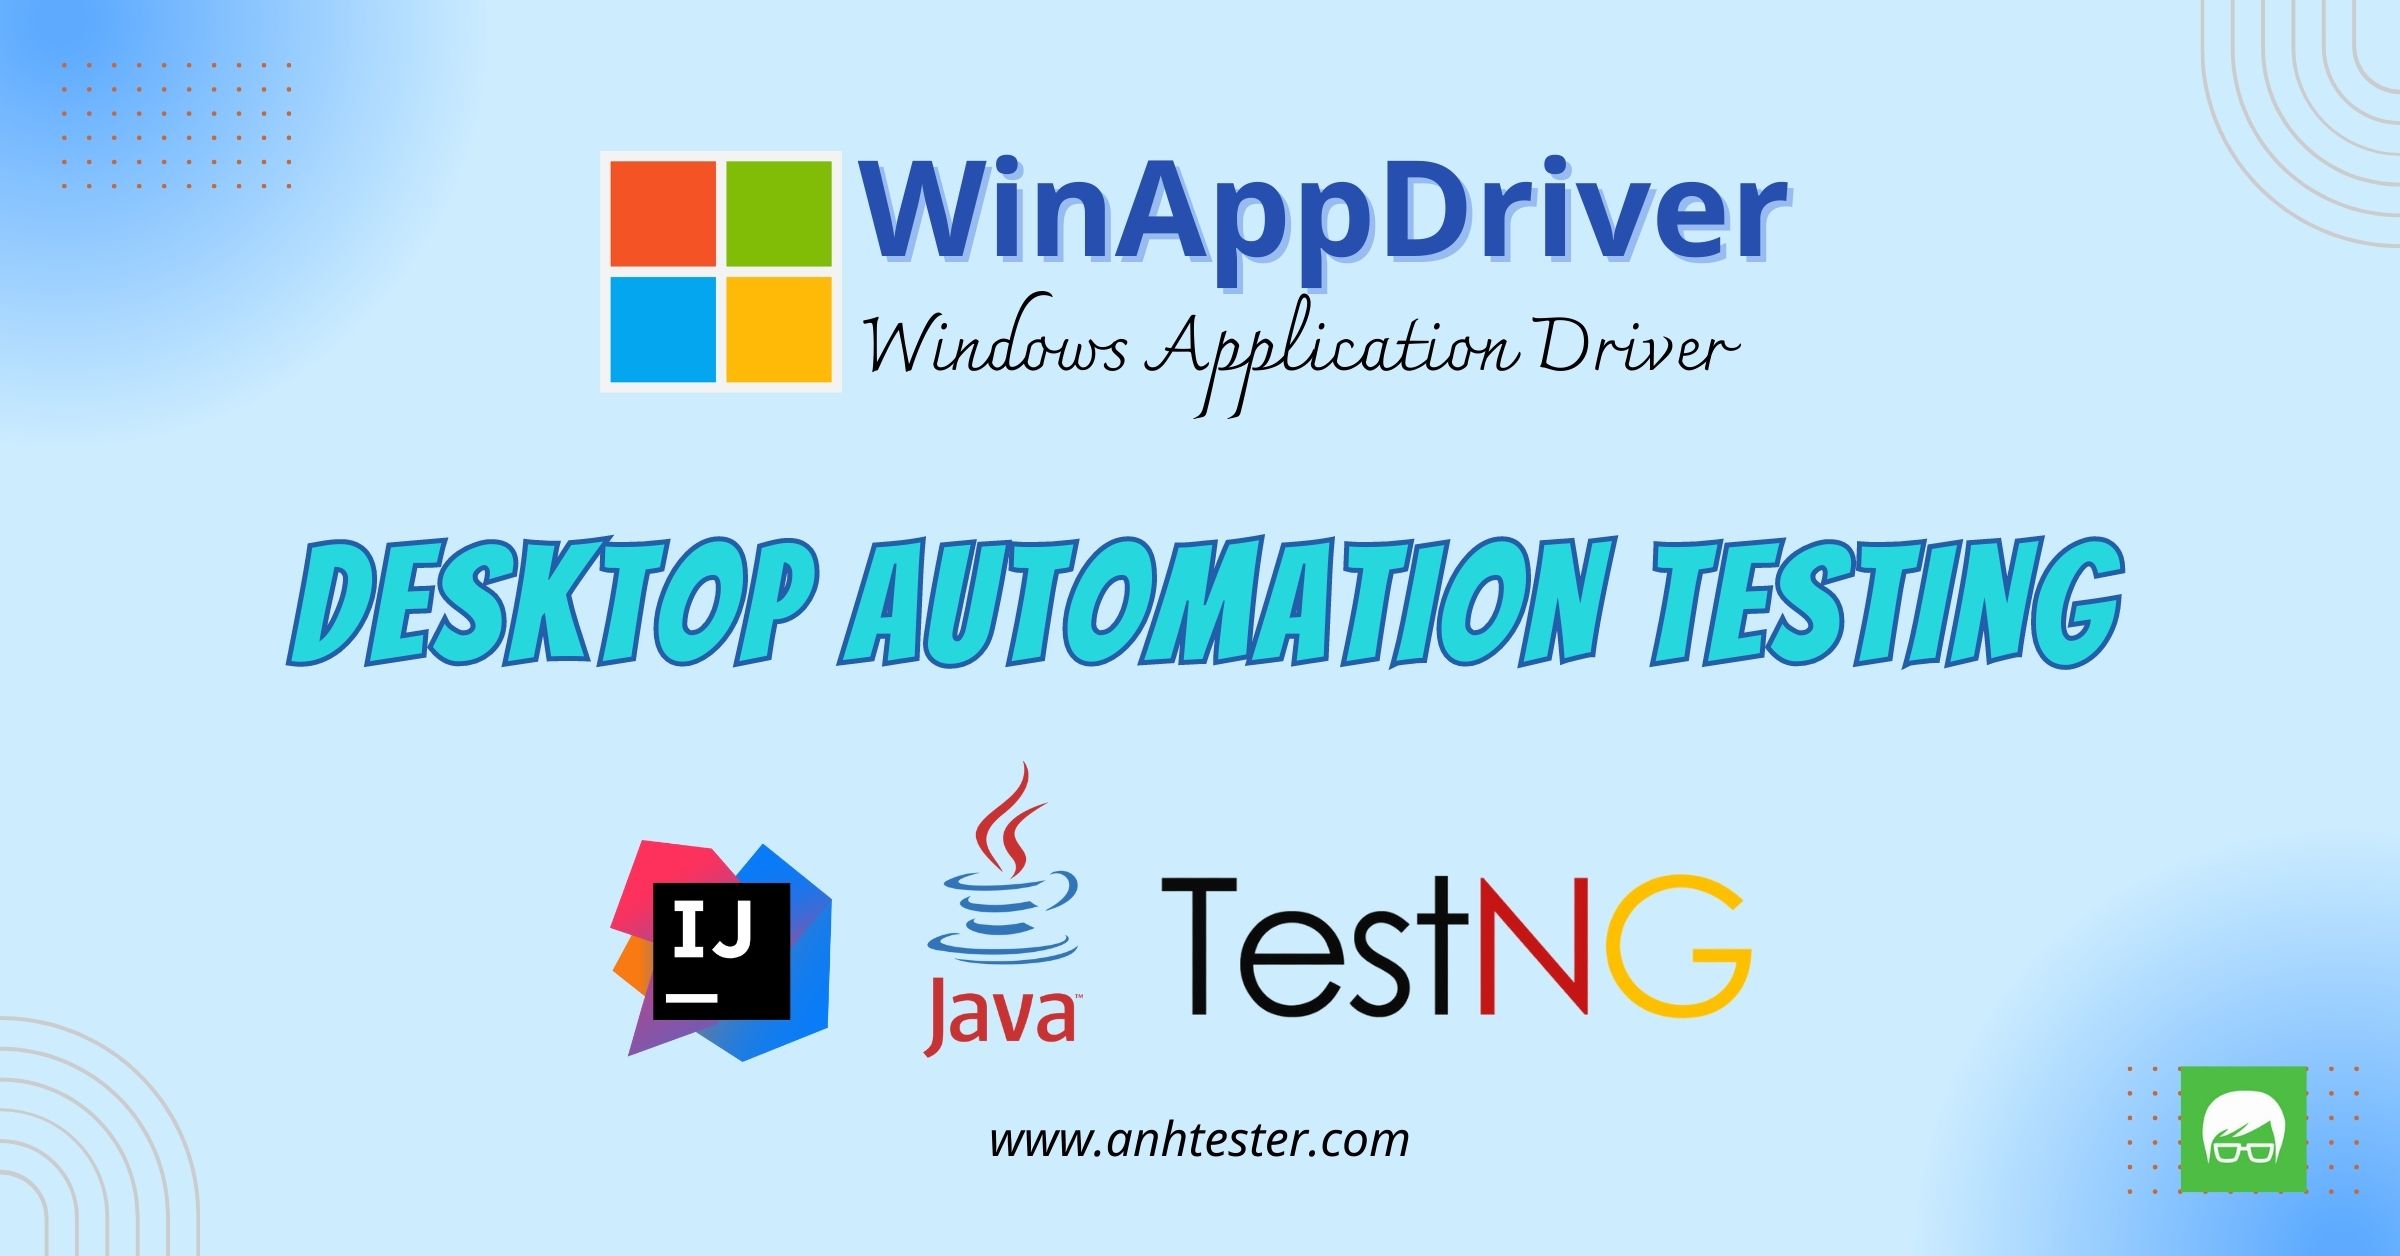 Desktop Automation Testing on Windows with WinAppDriver and Java